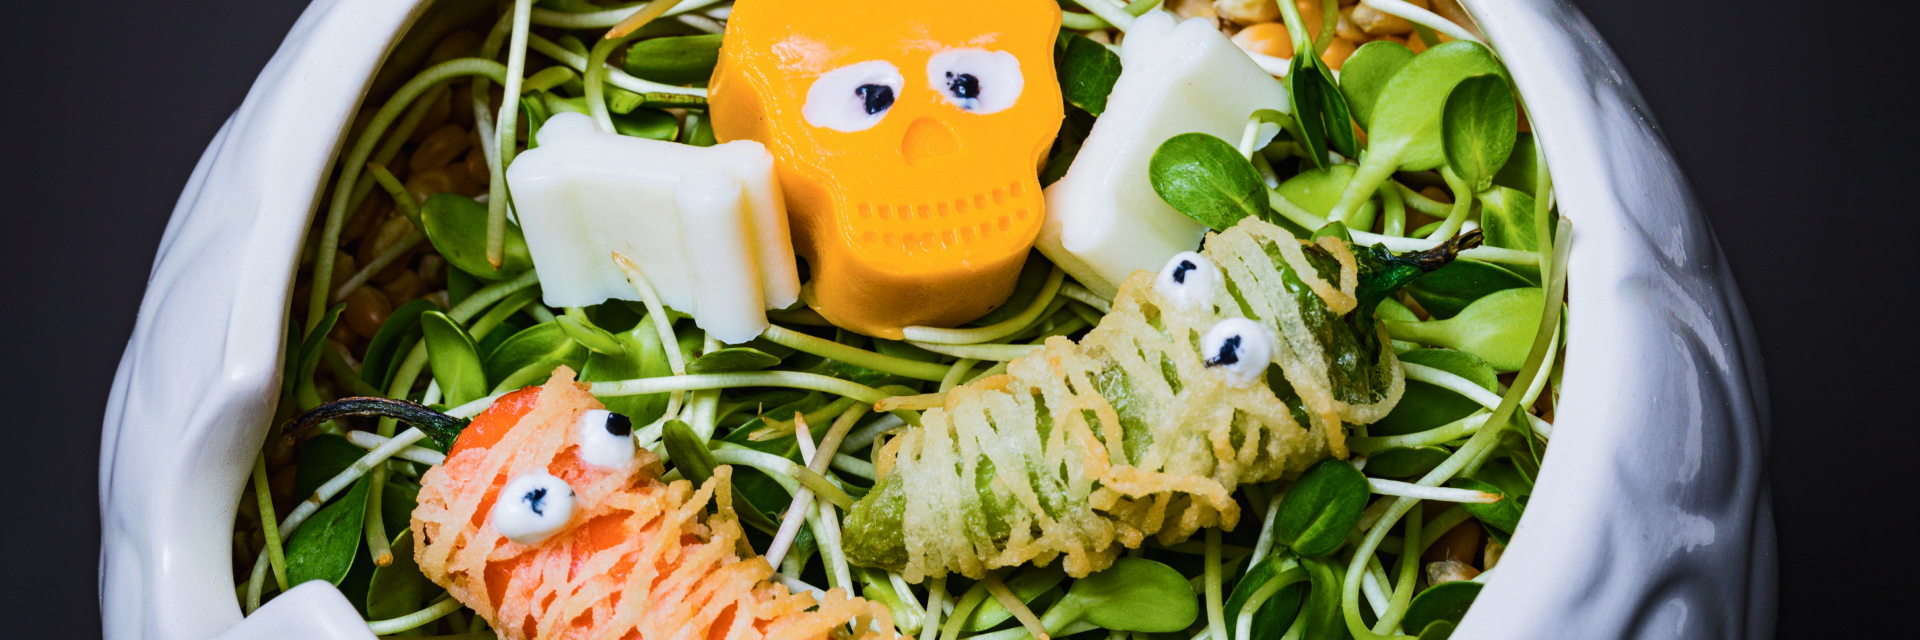 Spooky and Healthy: 5 Halloween-Inspired Recipes